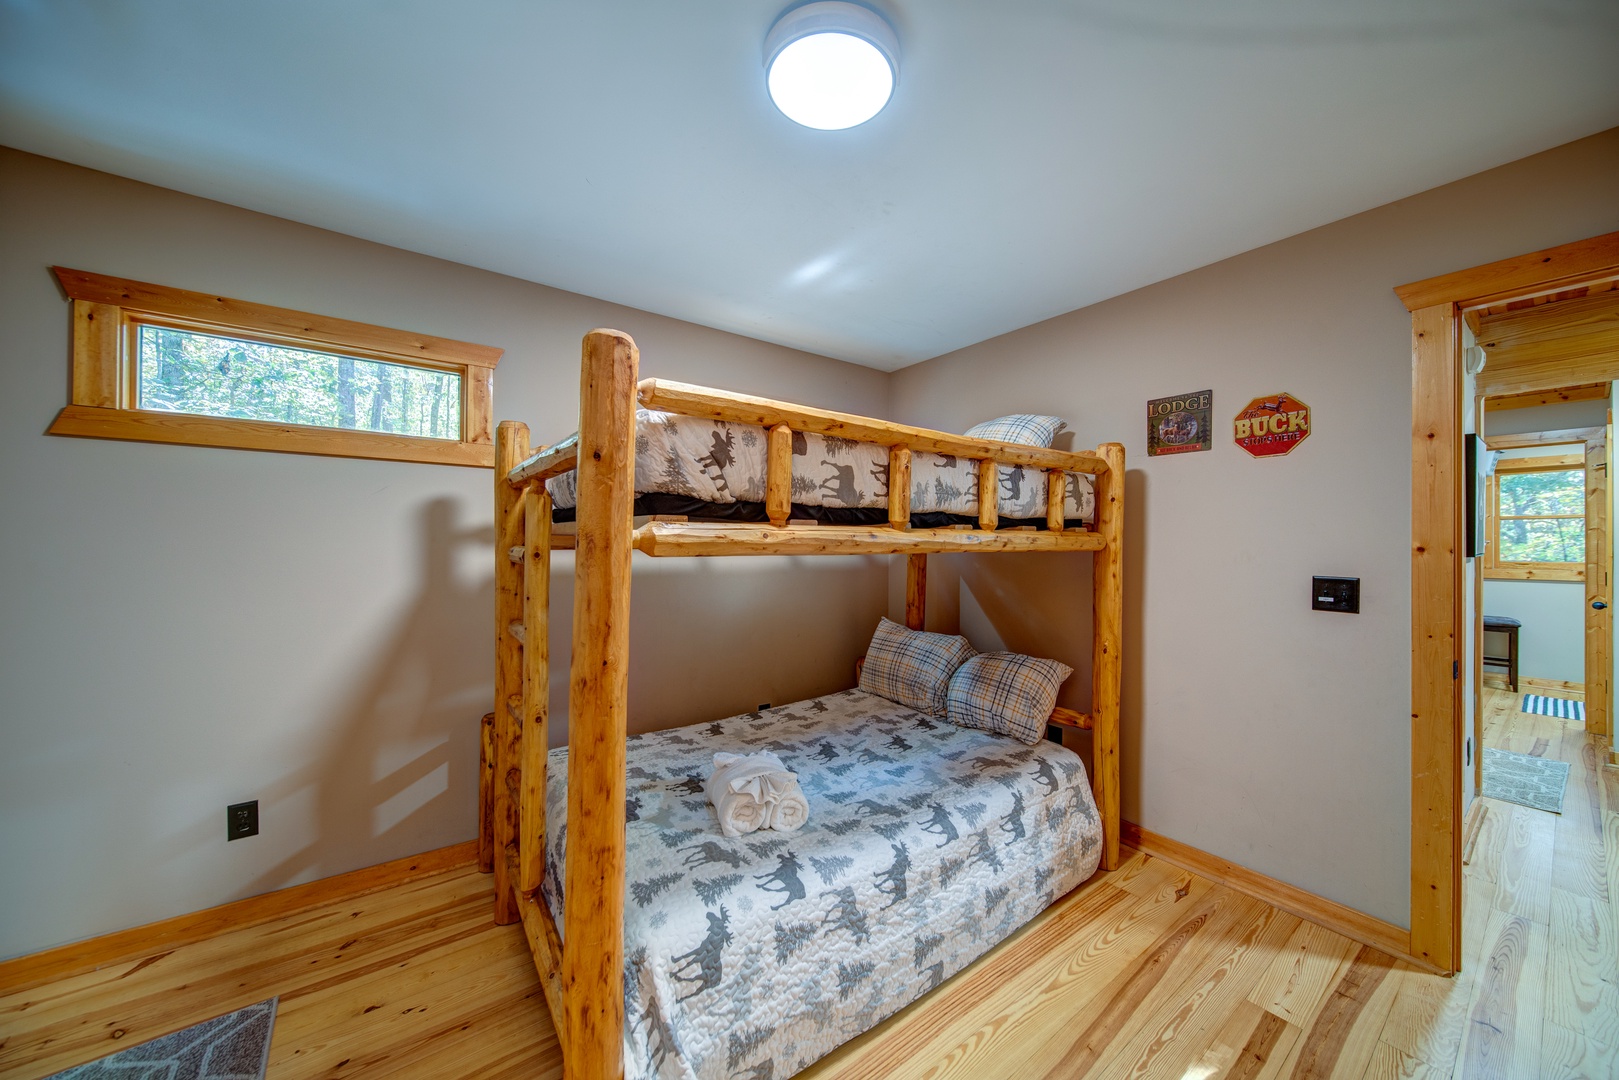 Bedroom W/ twin bunks and screened porch leads to Hot Tub